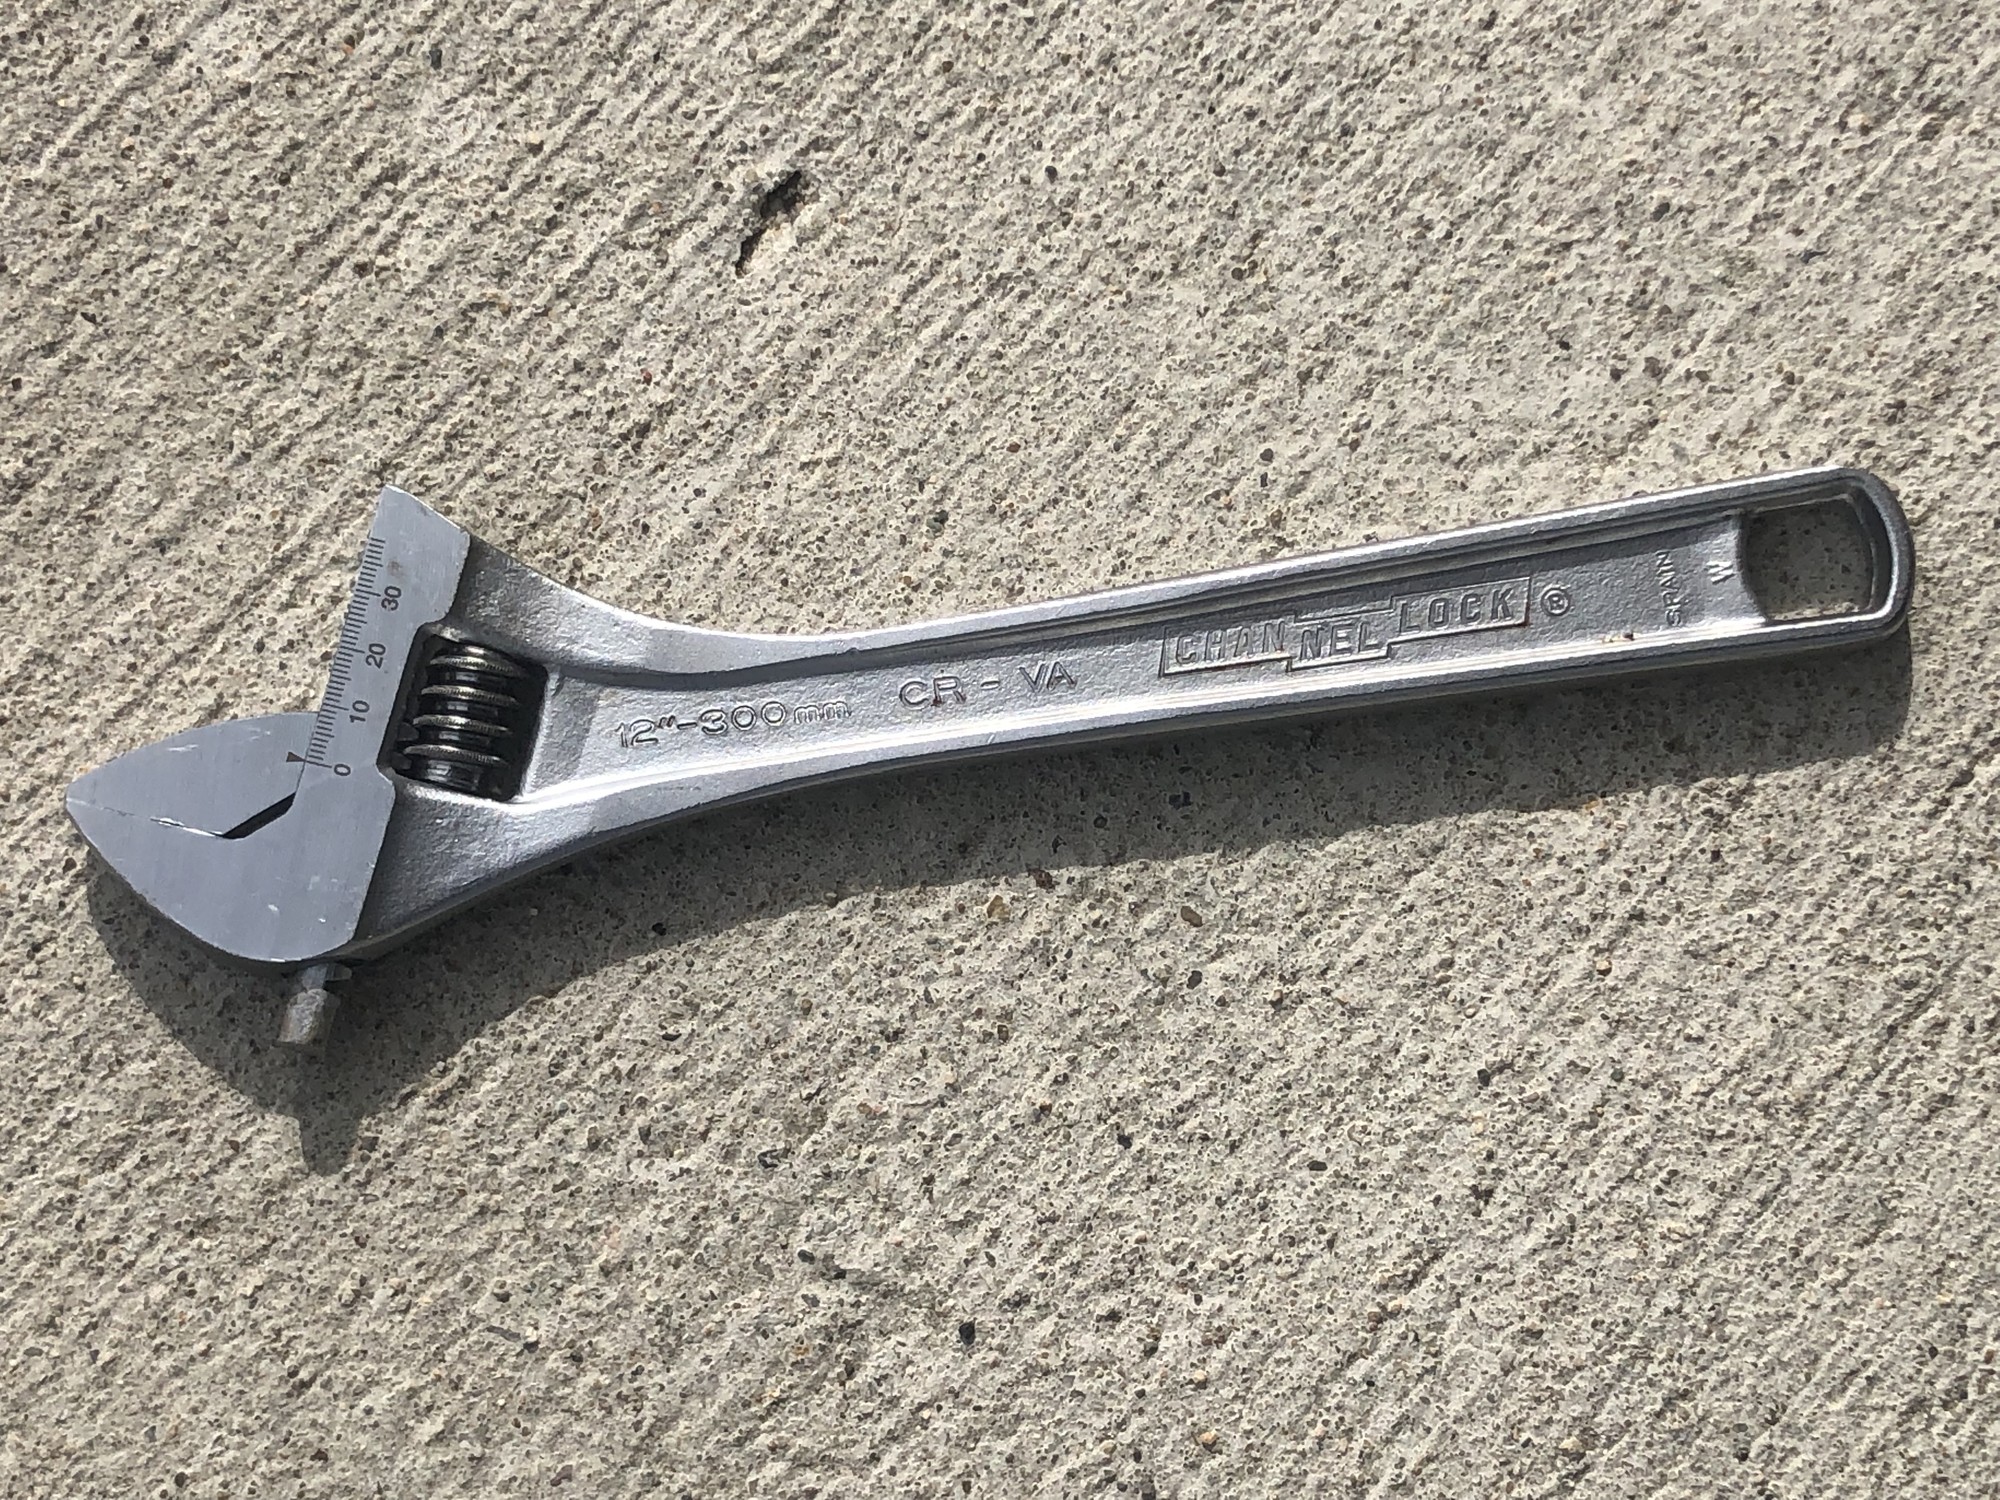 Channellock 812W Adjustable Wrench Chrome 12-Inch 